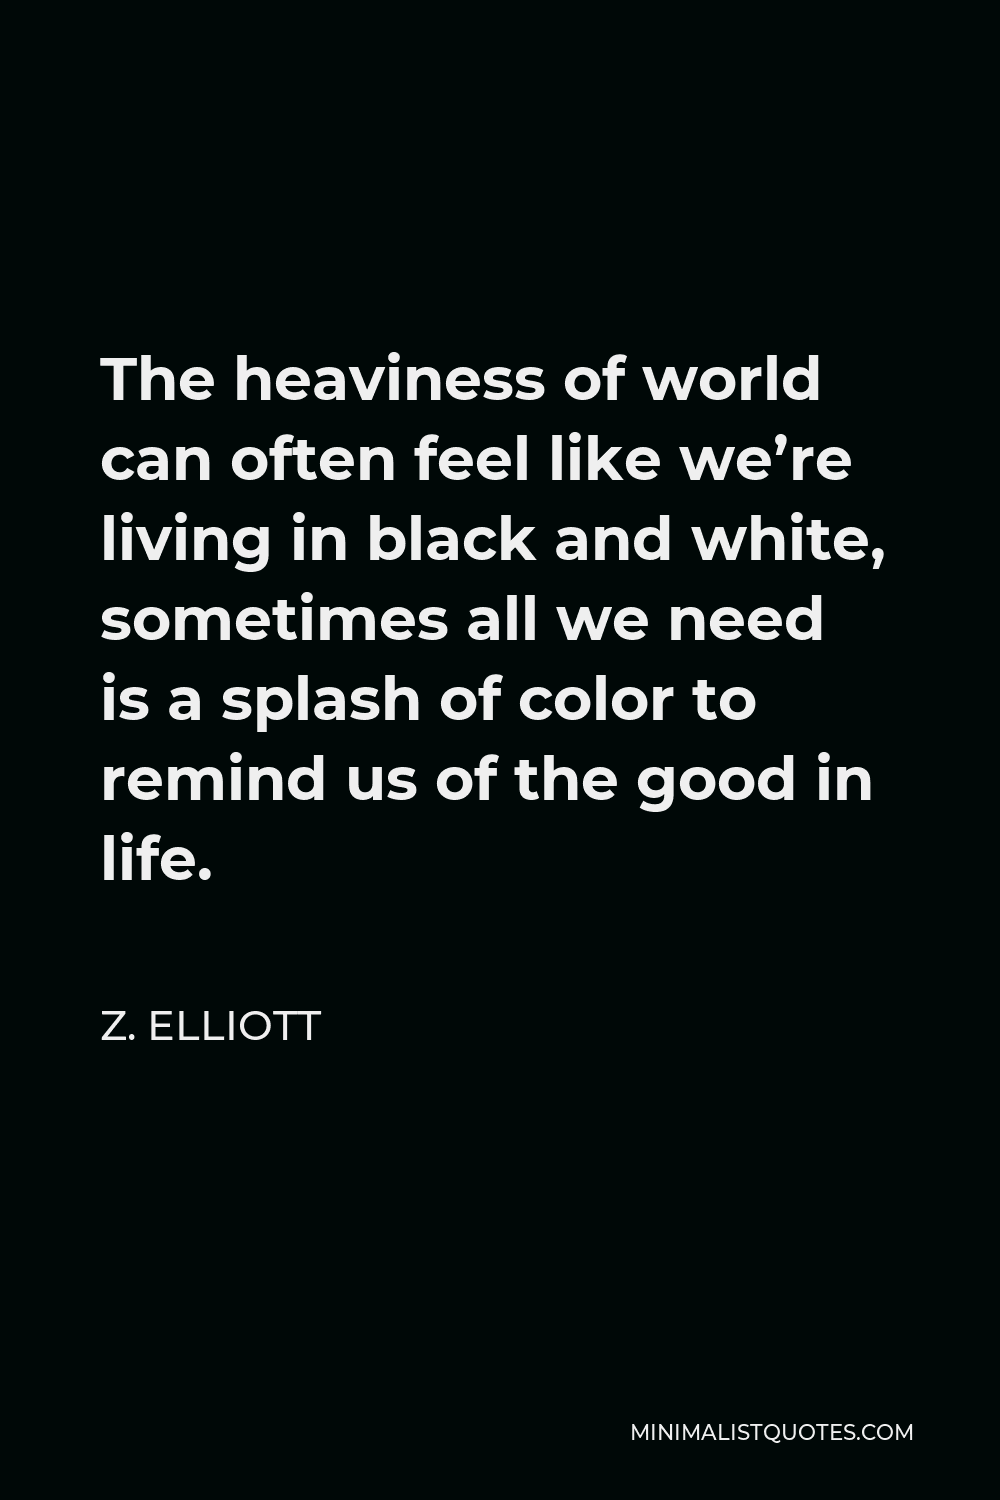 Z. Elliott Quote - The heaviness of world can often feel like we’re living in black and white, sometimes all we need is a splash of color to remind us of the good in life.